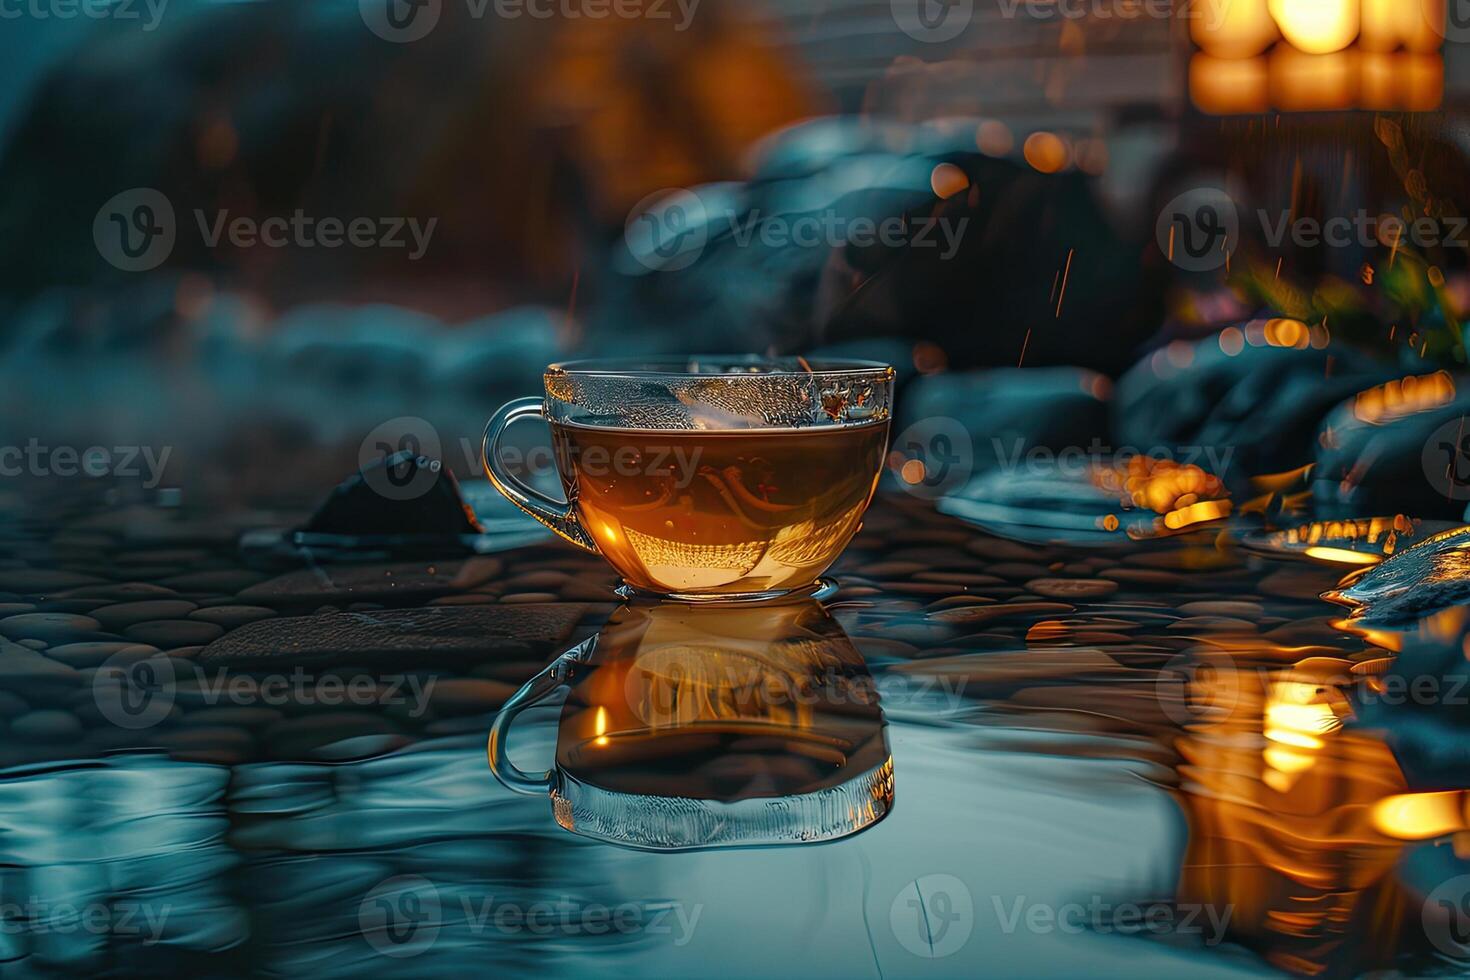 Steaming Tea Cup on Moist Surface photo